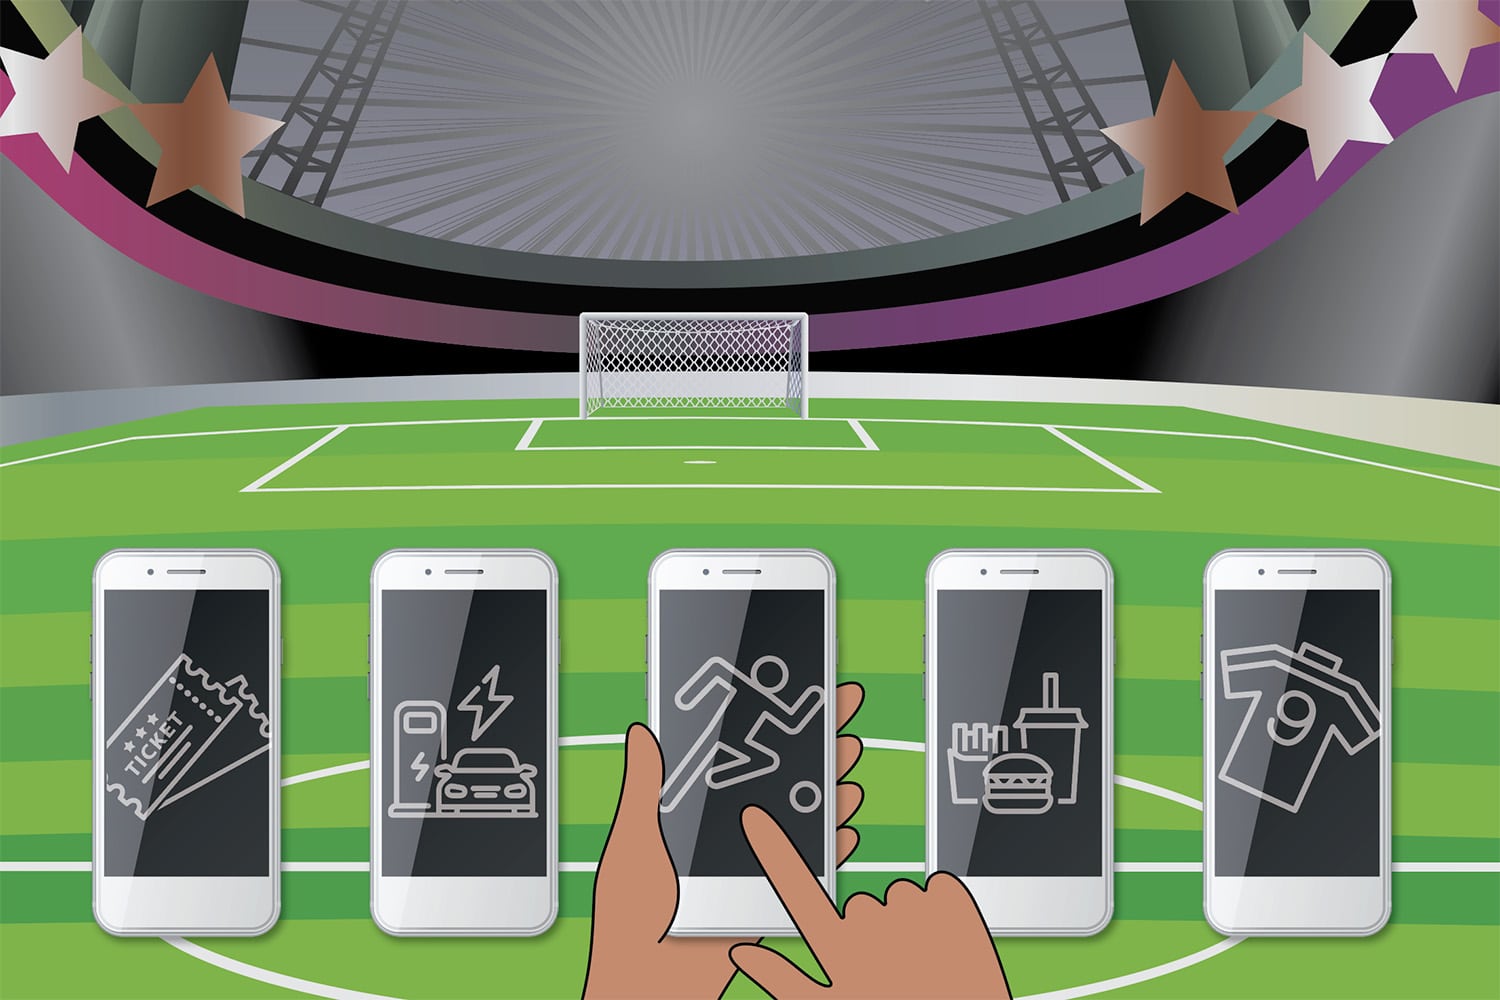 Illustration of 5 phones with event related icons in front of a backdrop of a soccer stadium.